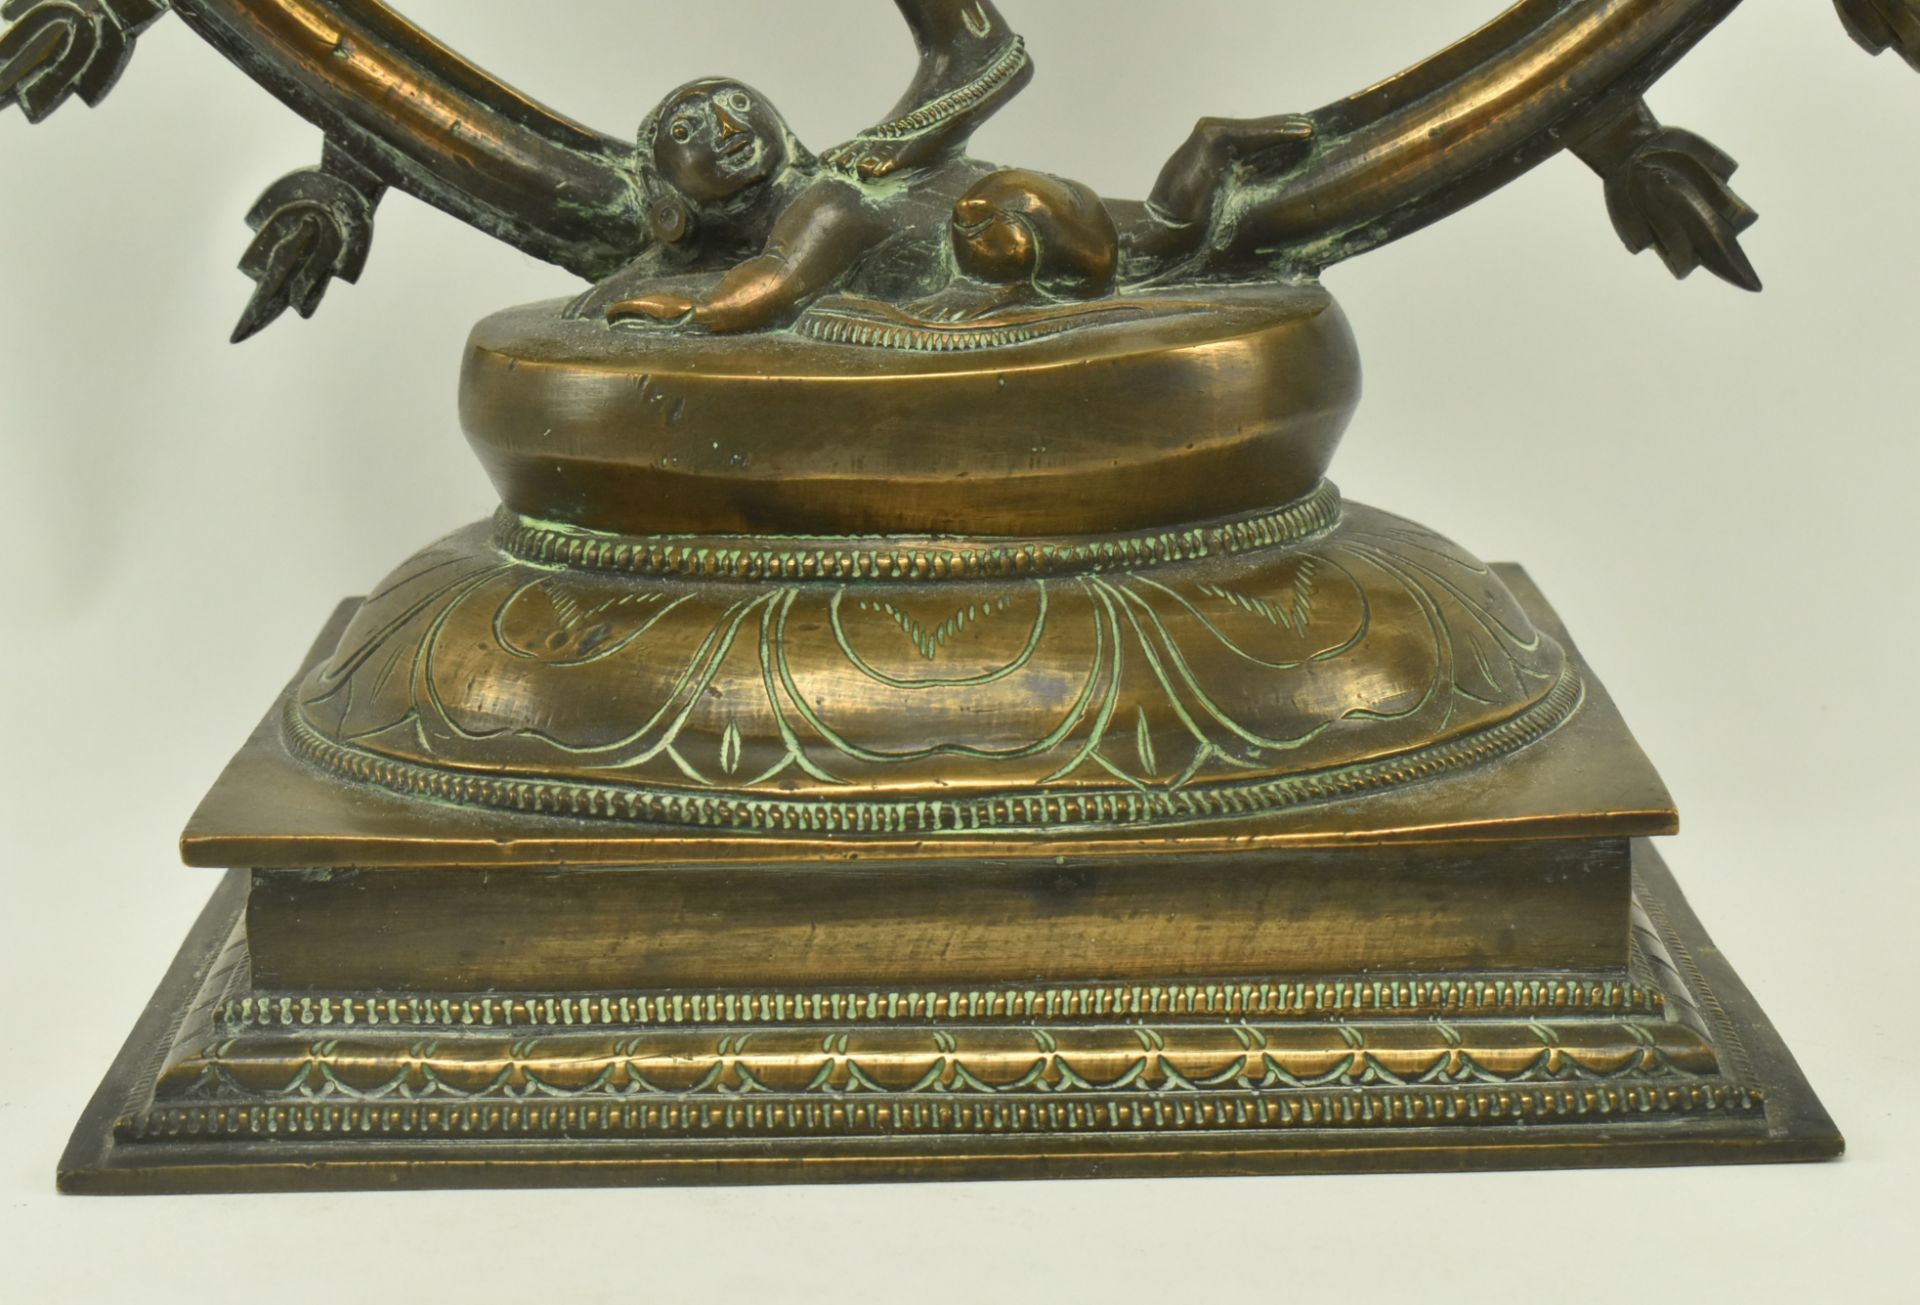 LATE 19TH CENTURY INDIAN DANCING SHIVA BRONZE TEMPLE STATUE - Image 4 of 7